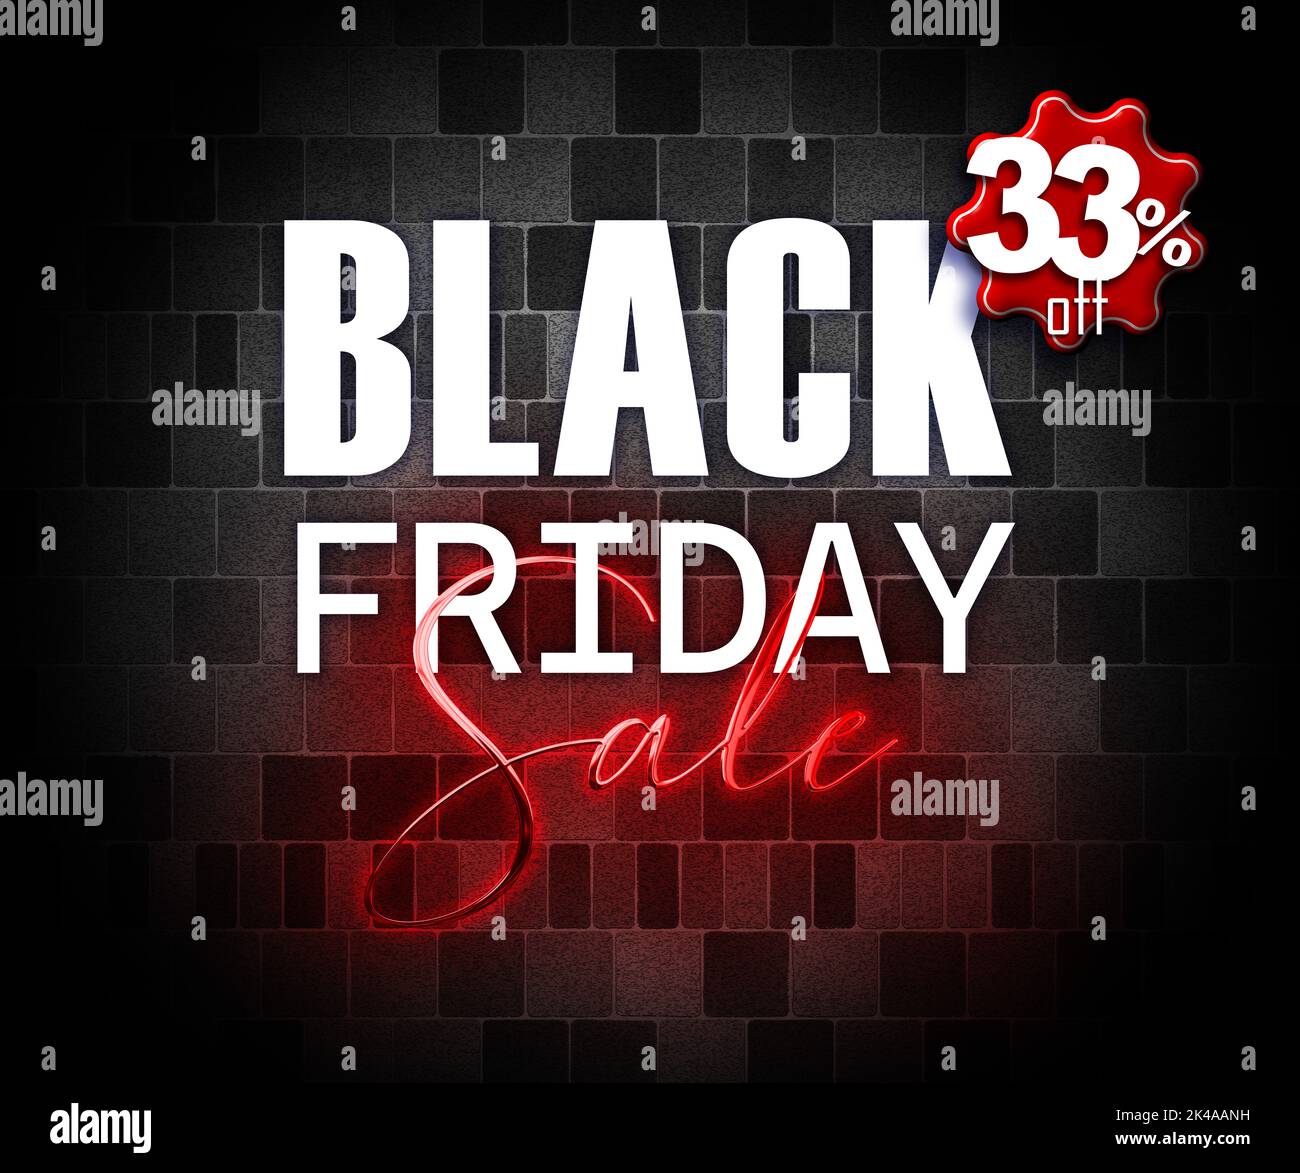 illustration with 3d elements black friday promotion banner 33 percent off sales increase Stock Photo